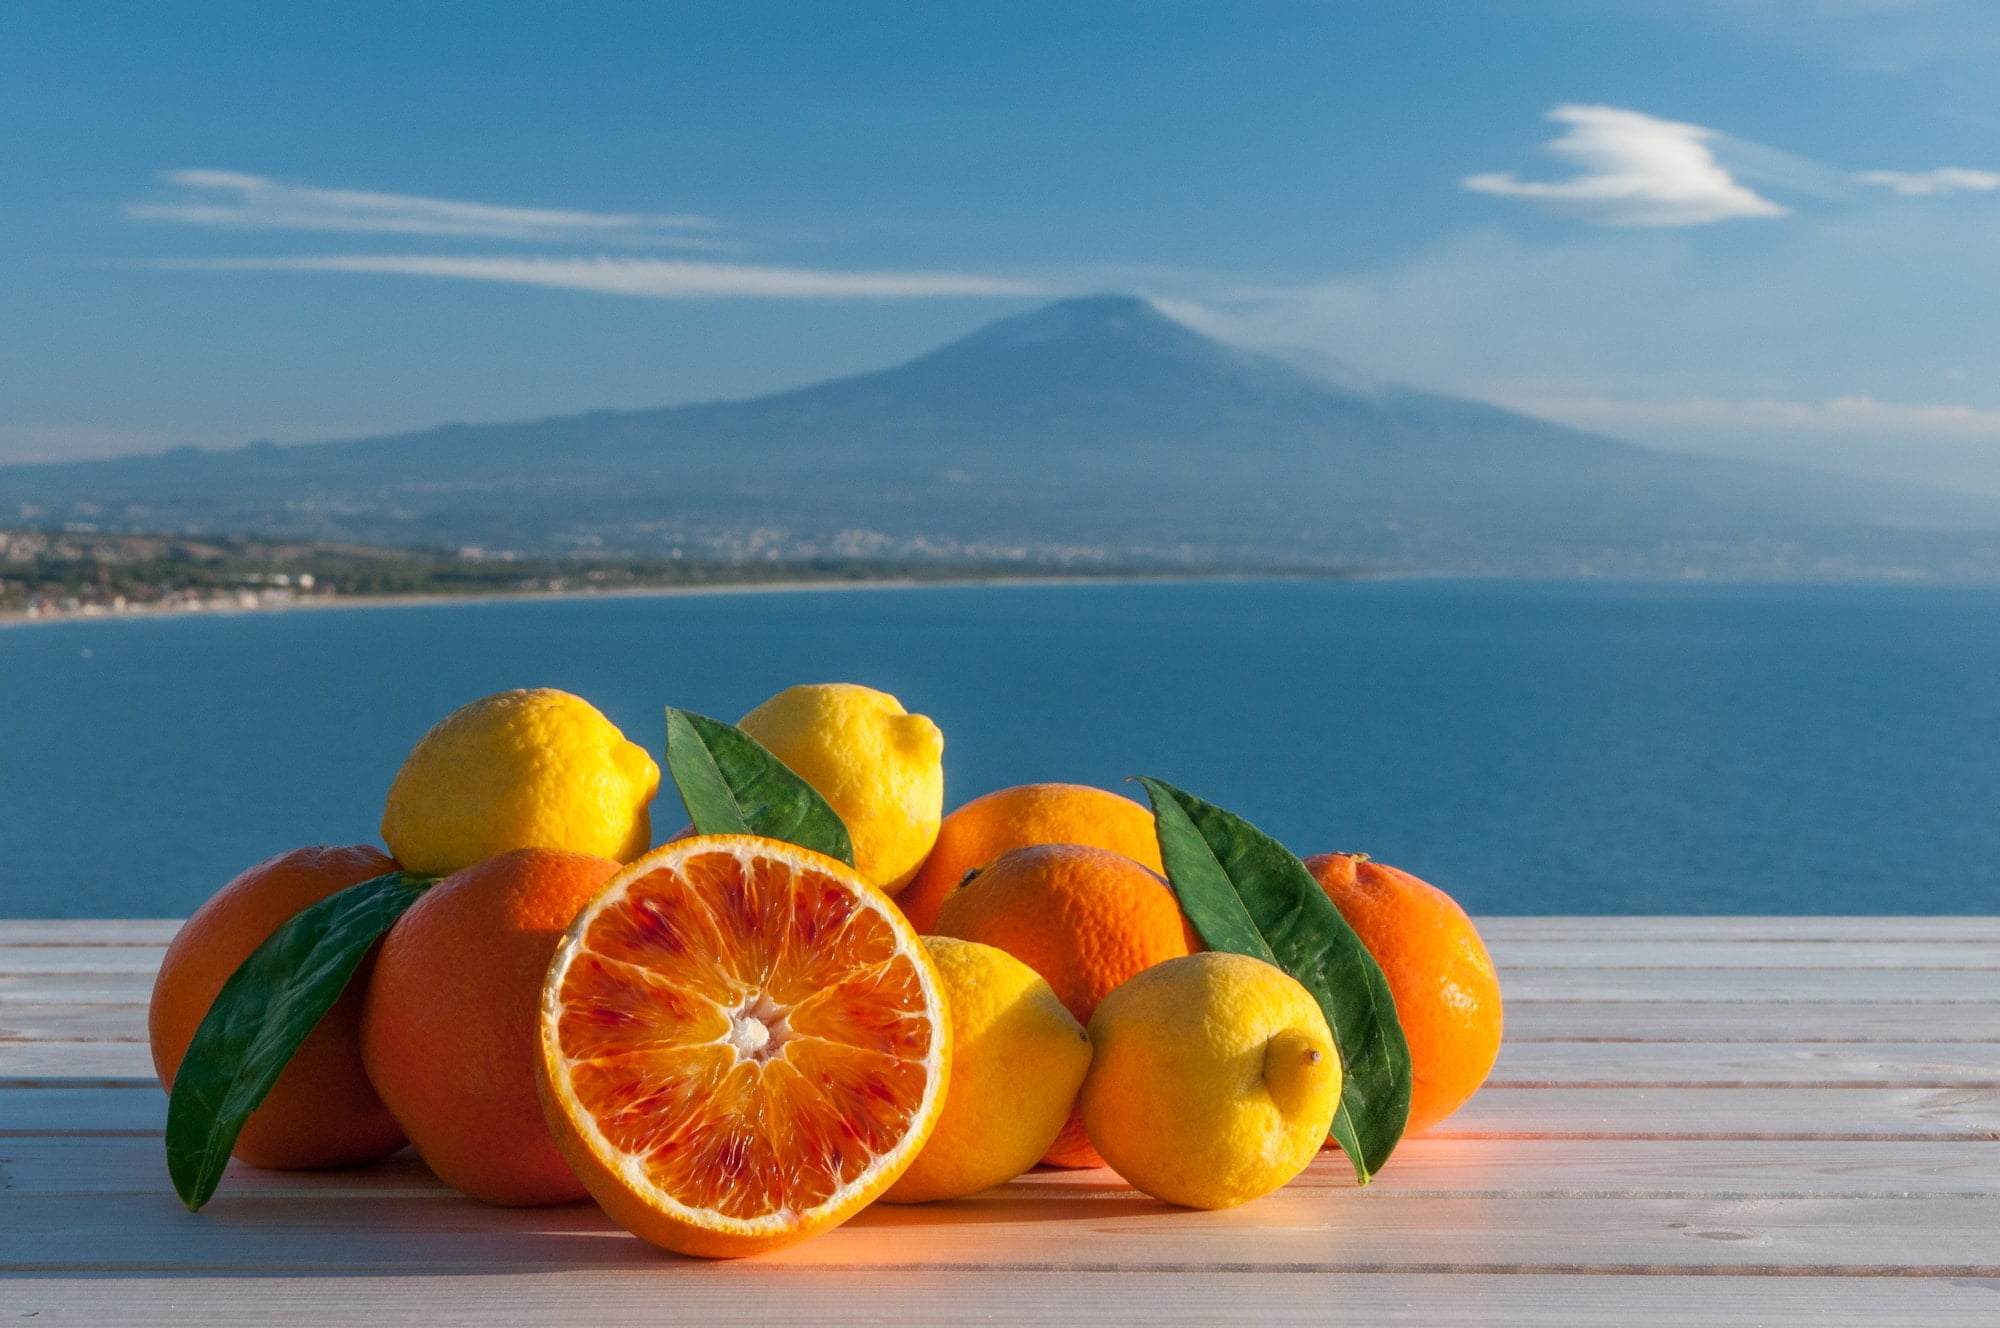 Sicilien. Oranges and lemons, blue sea, Mount Etna and clouds in the background